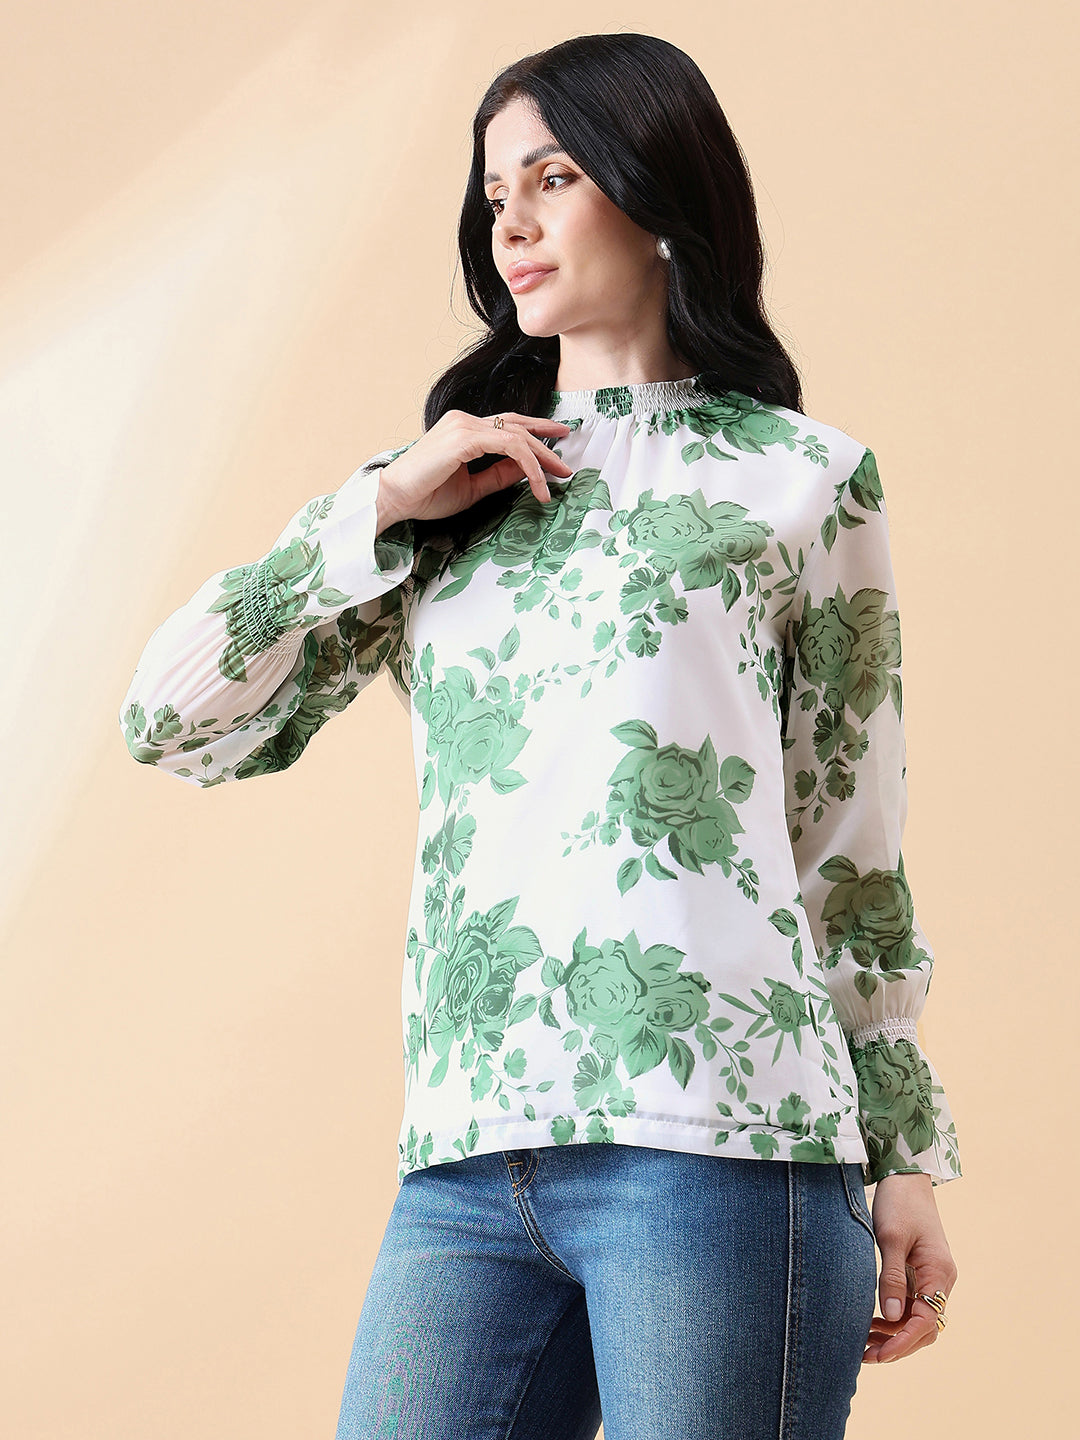 Ban-Neck Ggt Floral Top - Green/ White